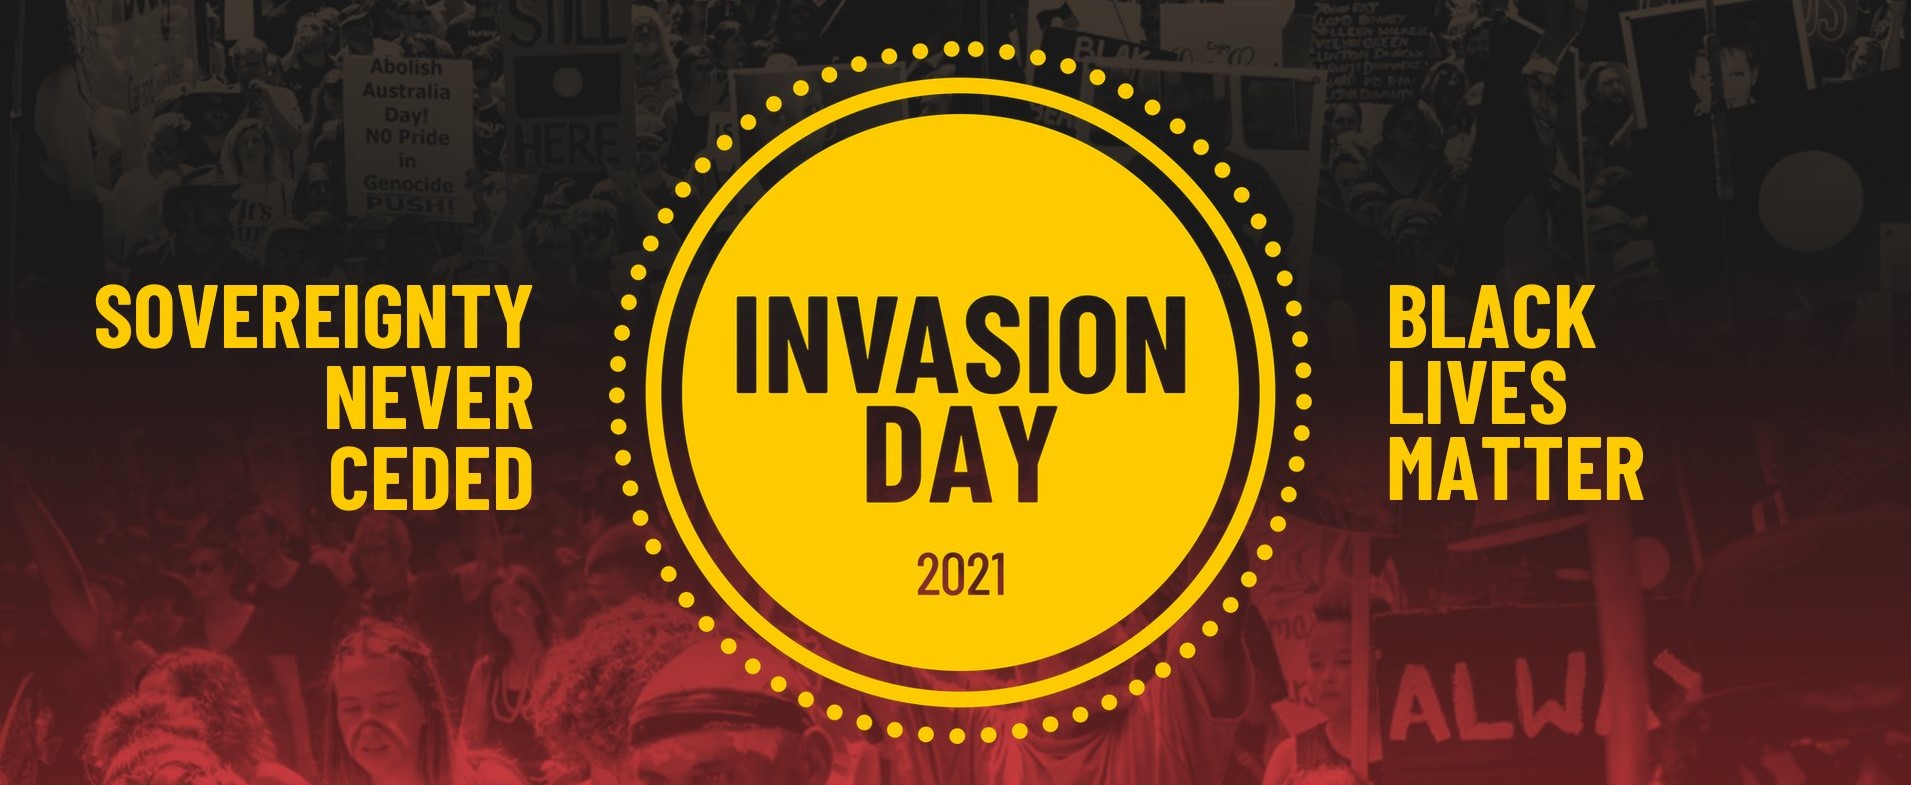 Invasion Day 2021: Here's a list of protests and events happening on  January 26 | Green Left